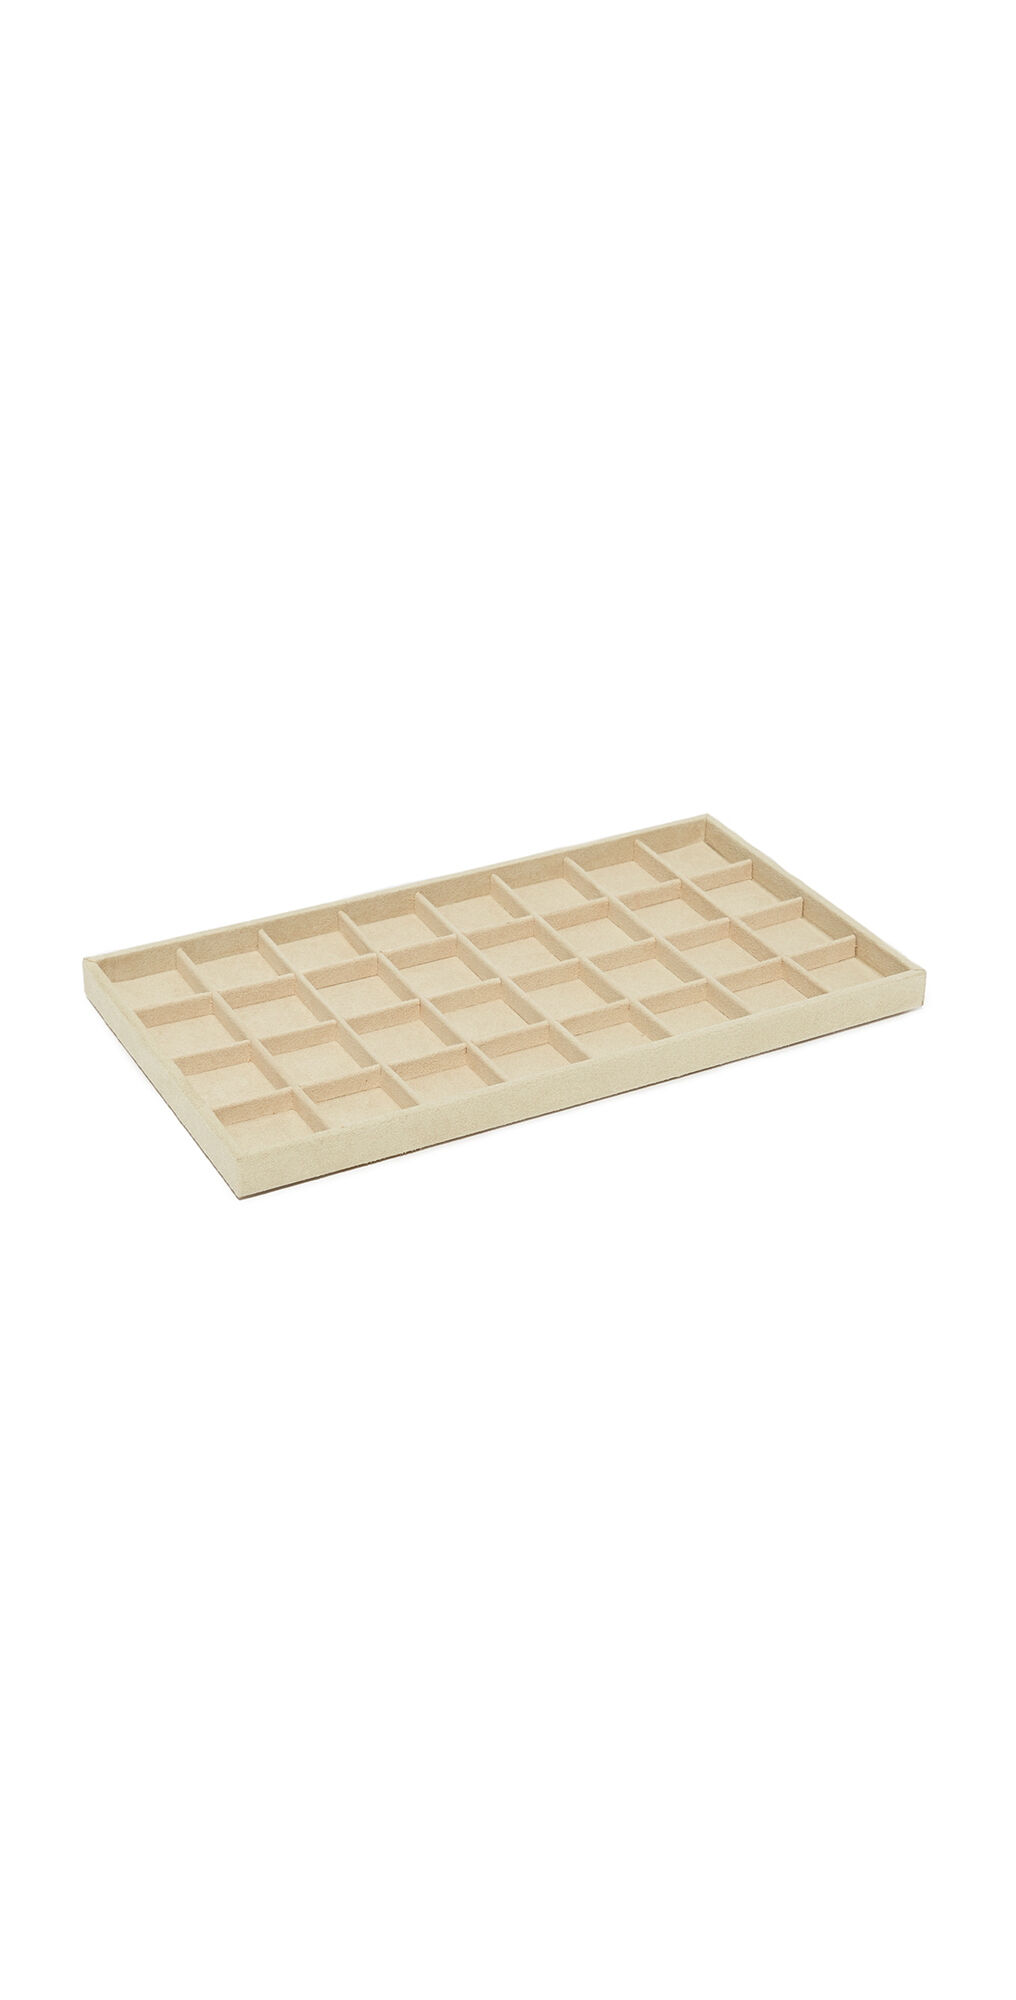 Shopbop Home Shopbop @Home WOLF Earring Insert Vault Trays Beige One Size  Beige  size:One Size